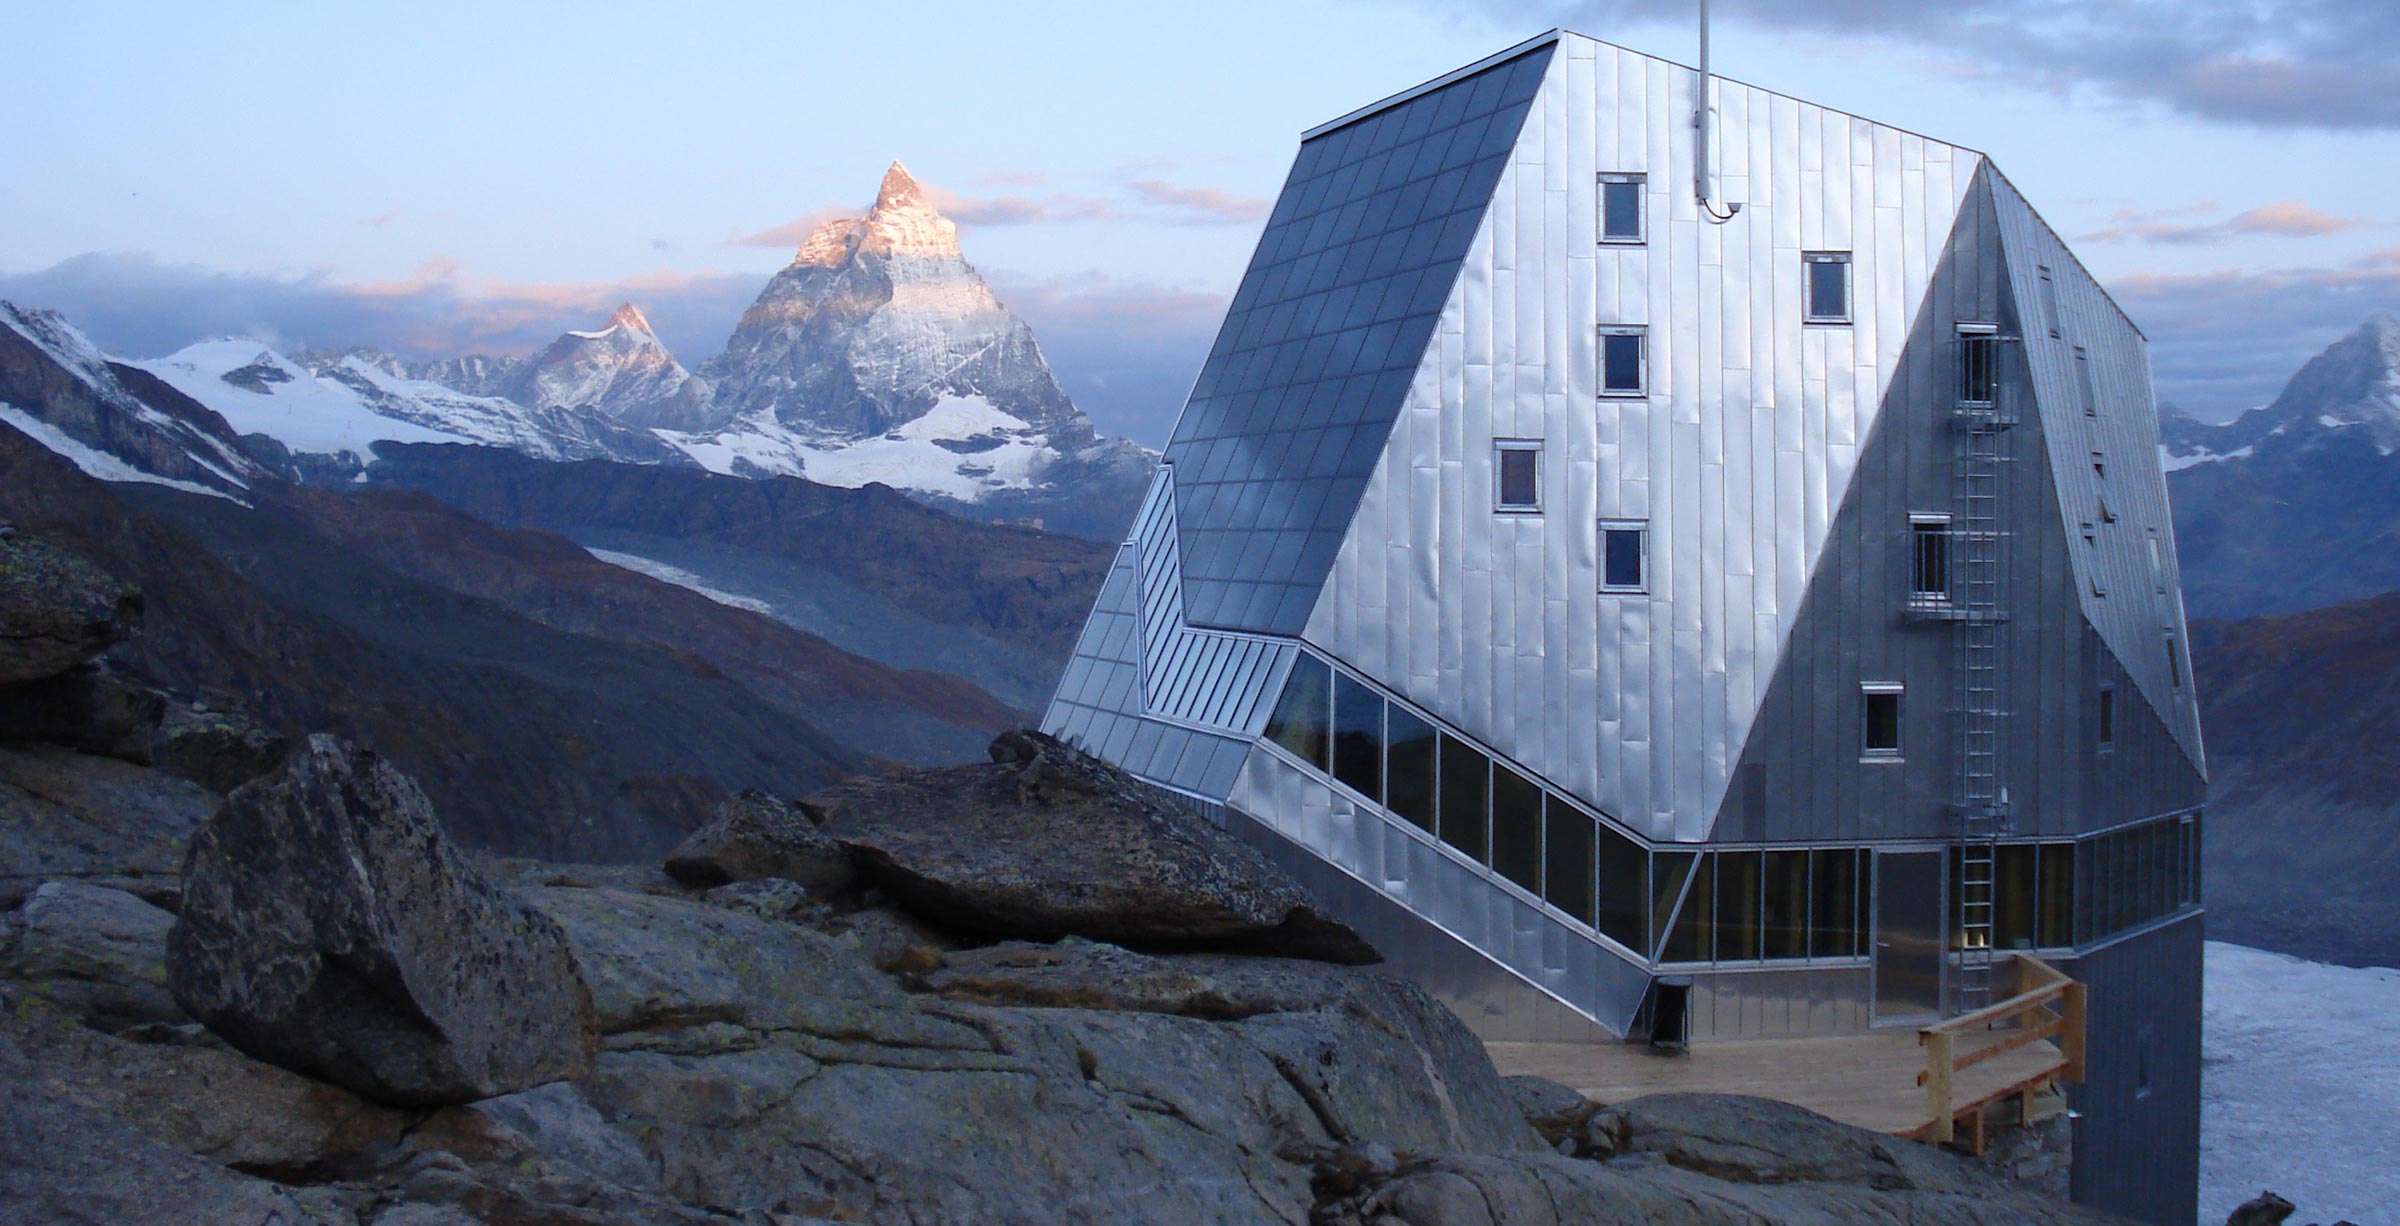 Monte Rosa Hut in the Monte Rosa Massif mountains